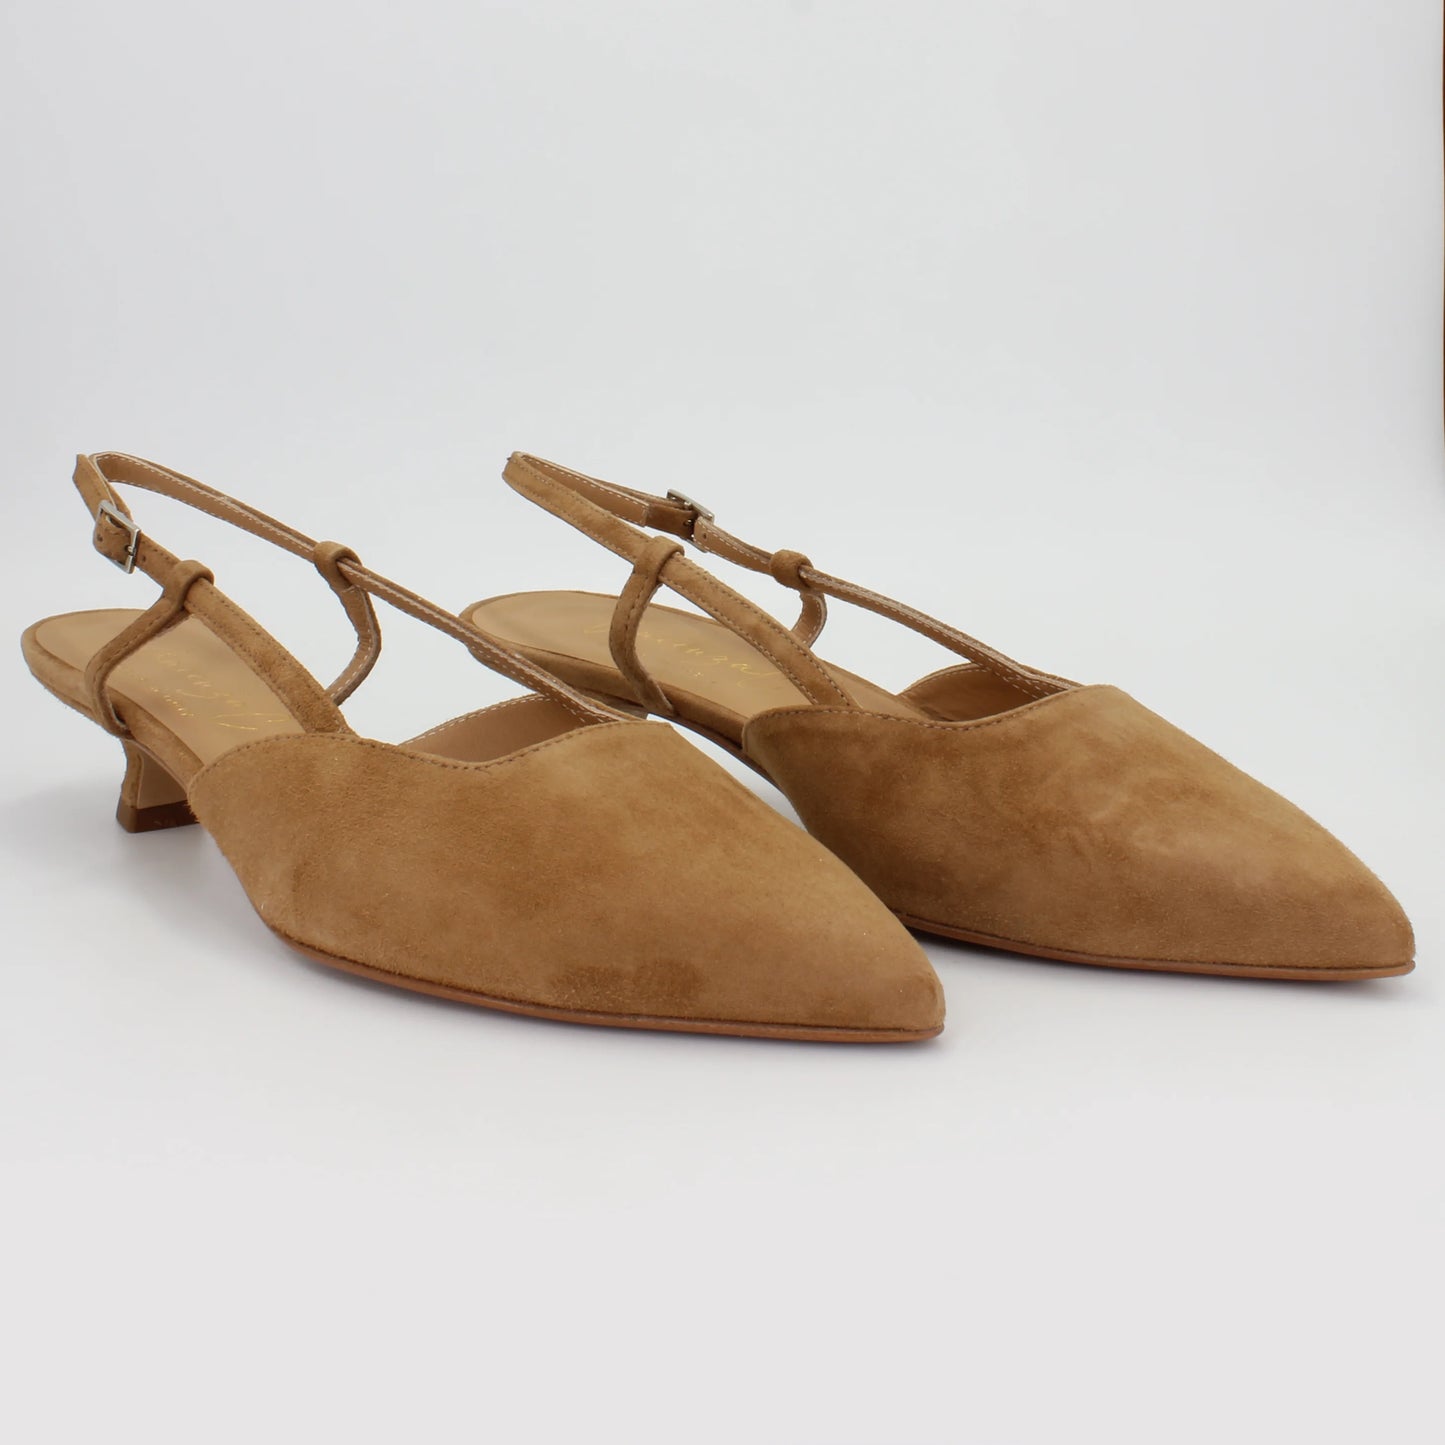 Shop Handmade Italian Leather Suede Low Sling Back Heel in Sella (VO5) or browse our range of hand-made Italian shoes for women in leather or suede in-store at Aliverti Cape Town, or shop online. We deliver in South Africa & offer multiple payment plans as well as accept multiple safe & secure payment methods.